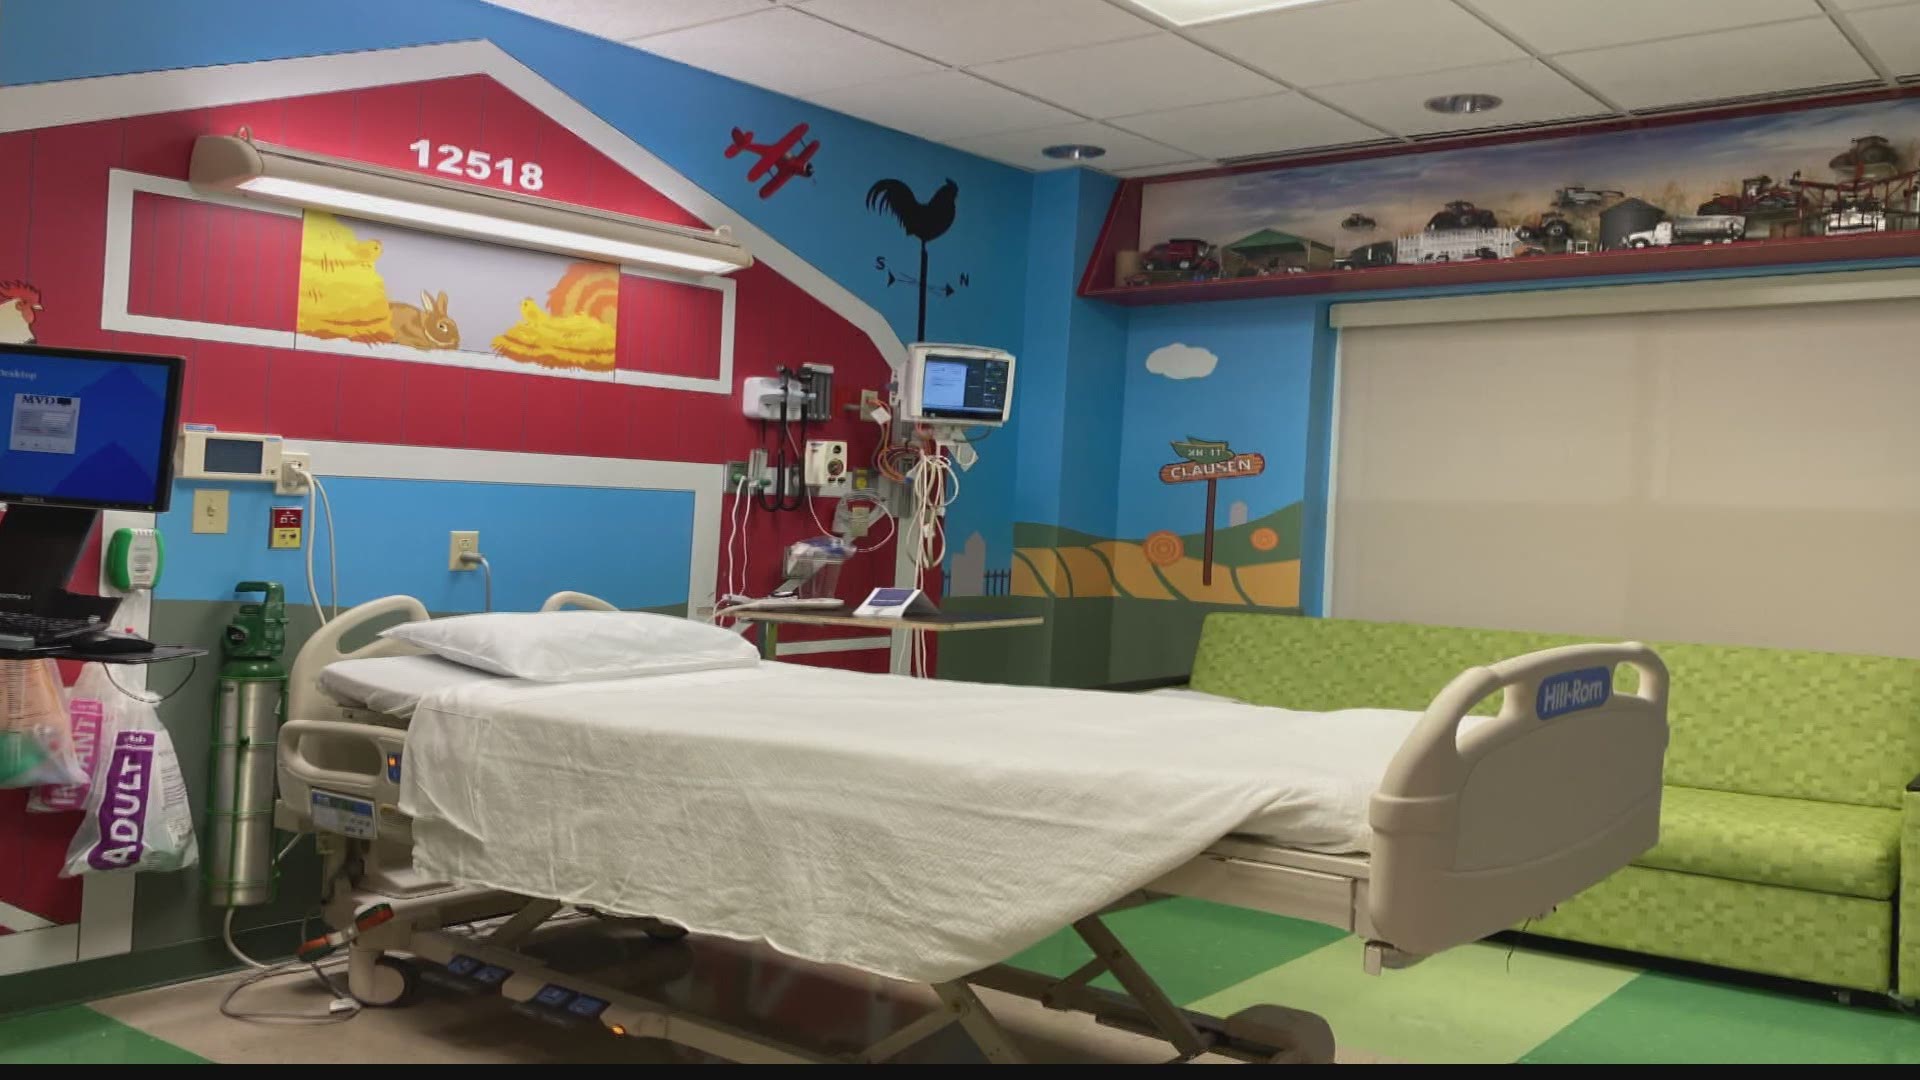 Donations helped create a special hospital room in memory of a little boy.